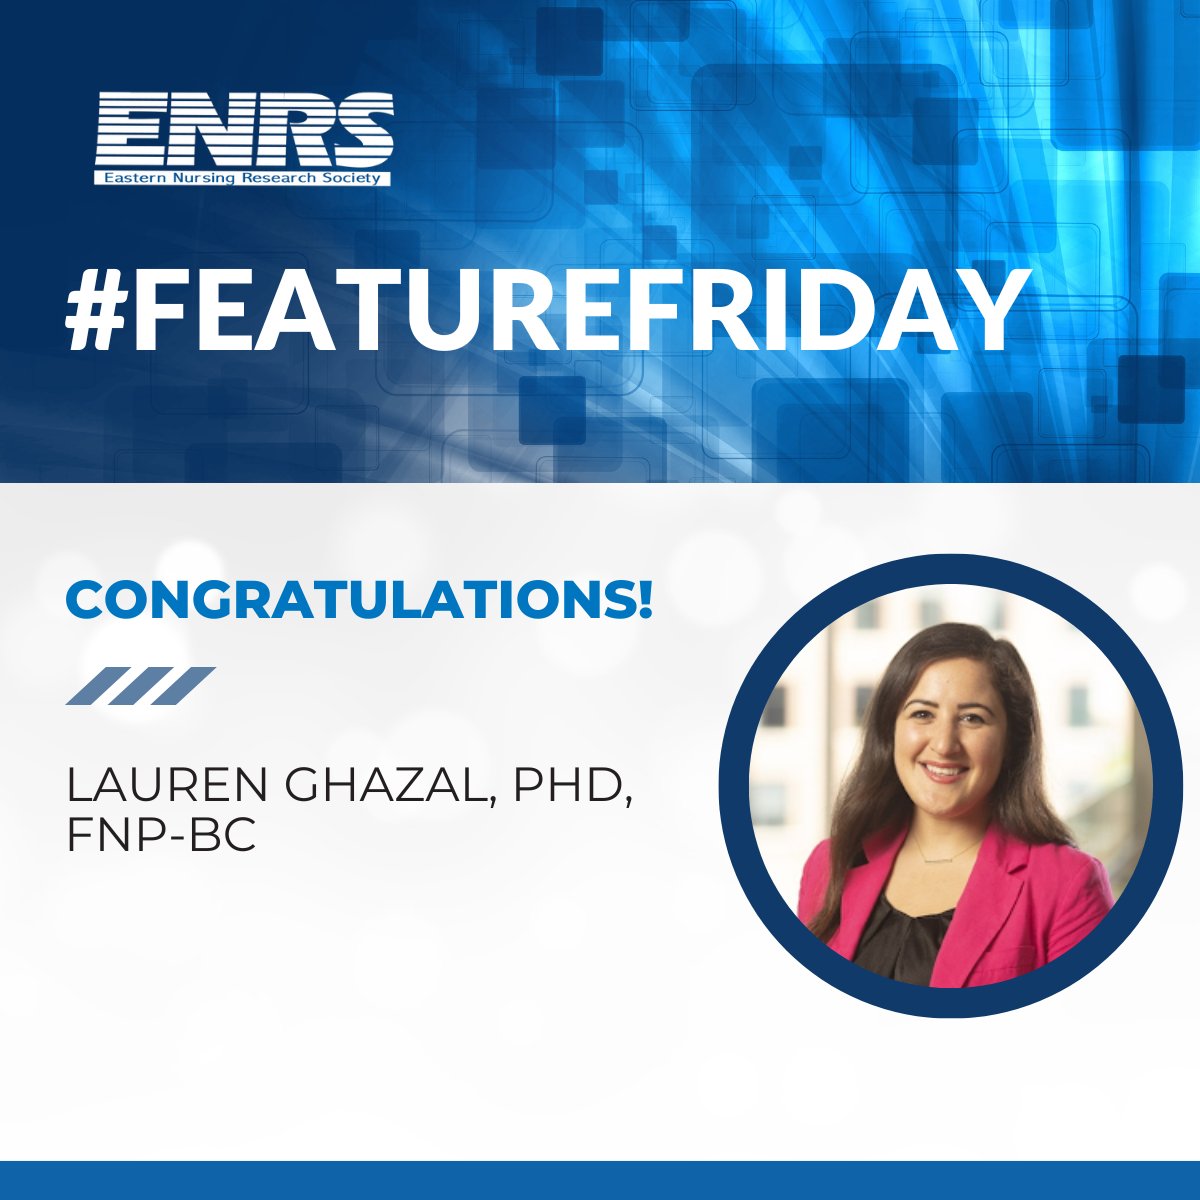 #FeatureFriday: Congratulations to Lauren Ghazal, PhD, FNP-BC, who has been chosen as a STAT Wunderkind, a “next-generation scientific superstar,” in a national contest that singles out young, high achievers from top research institutions. Read more 👉 son.rochester.edu/newsroom/2023/…